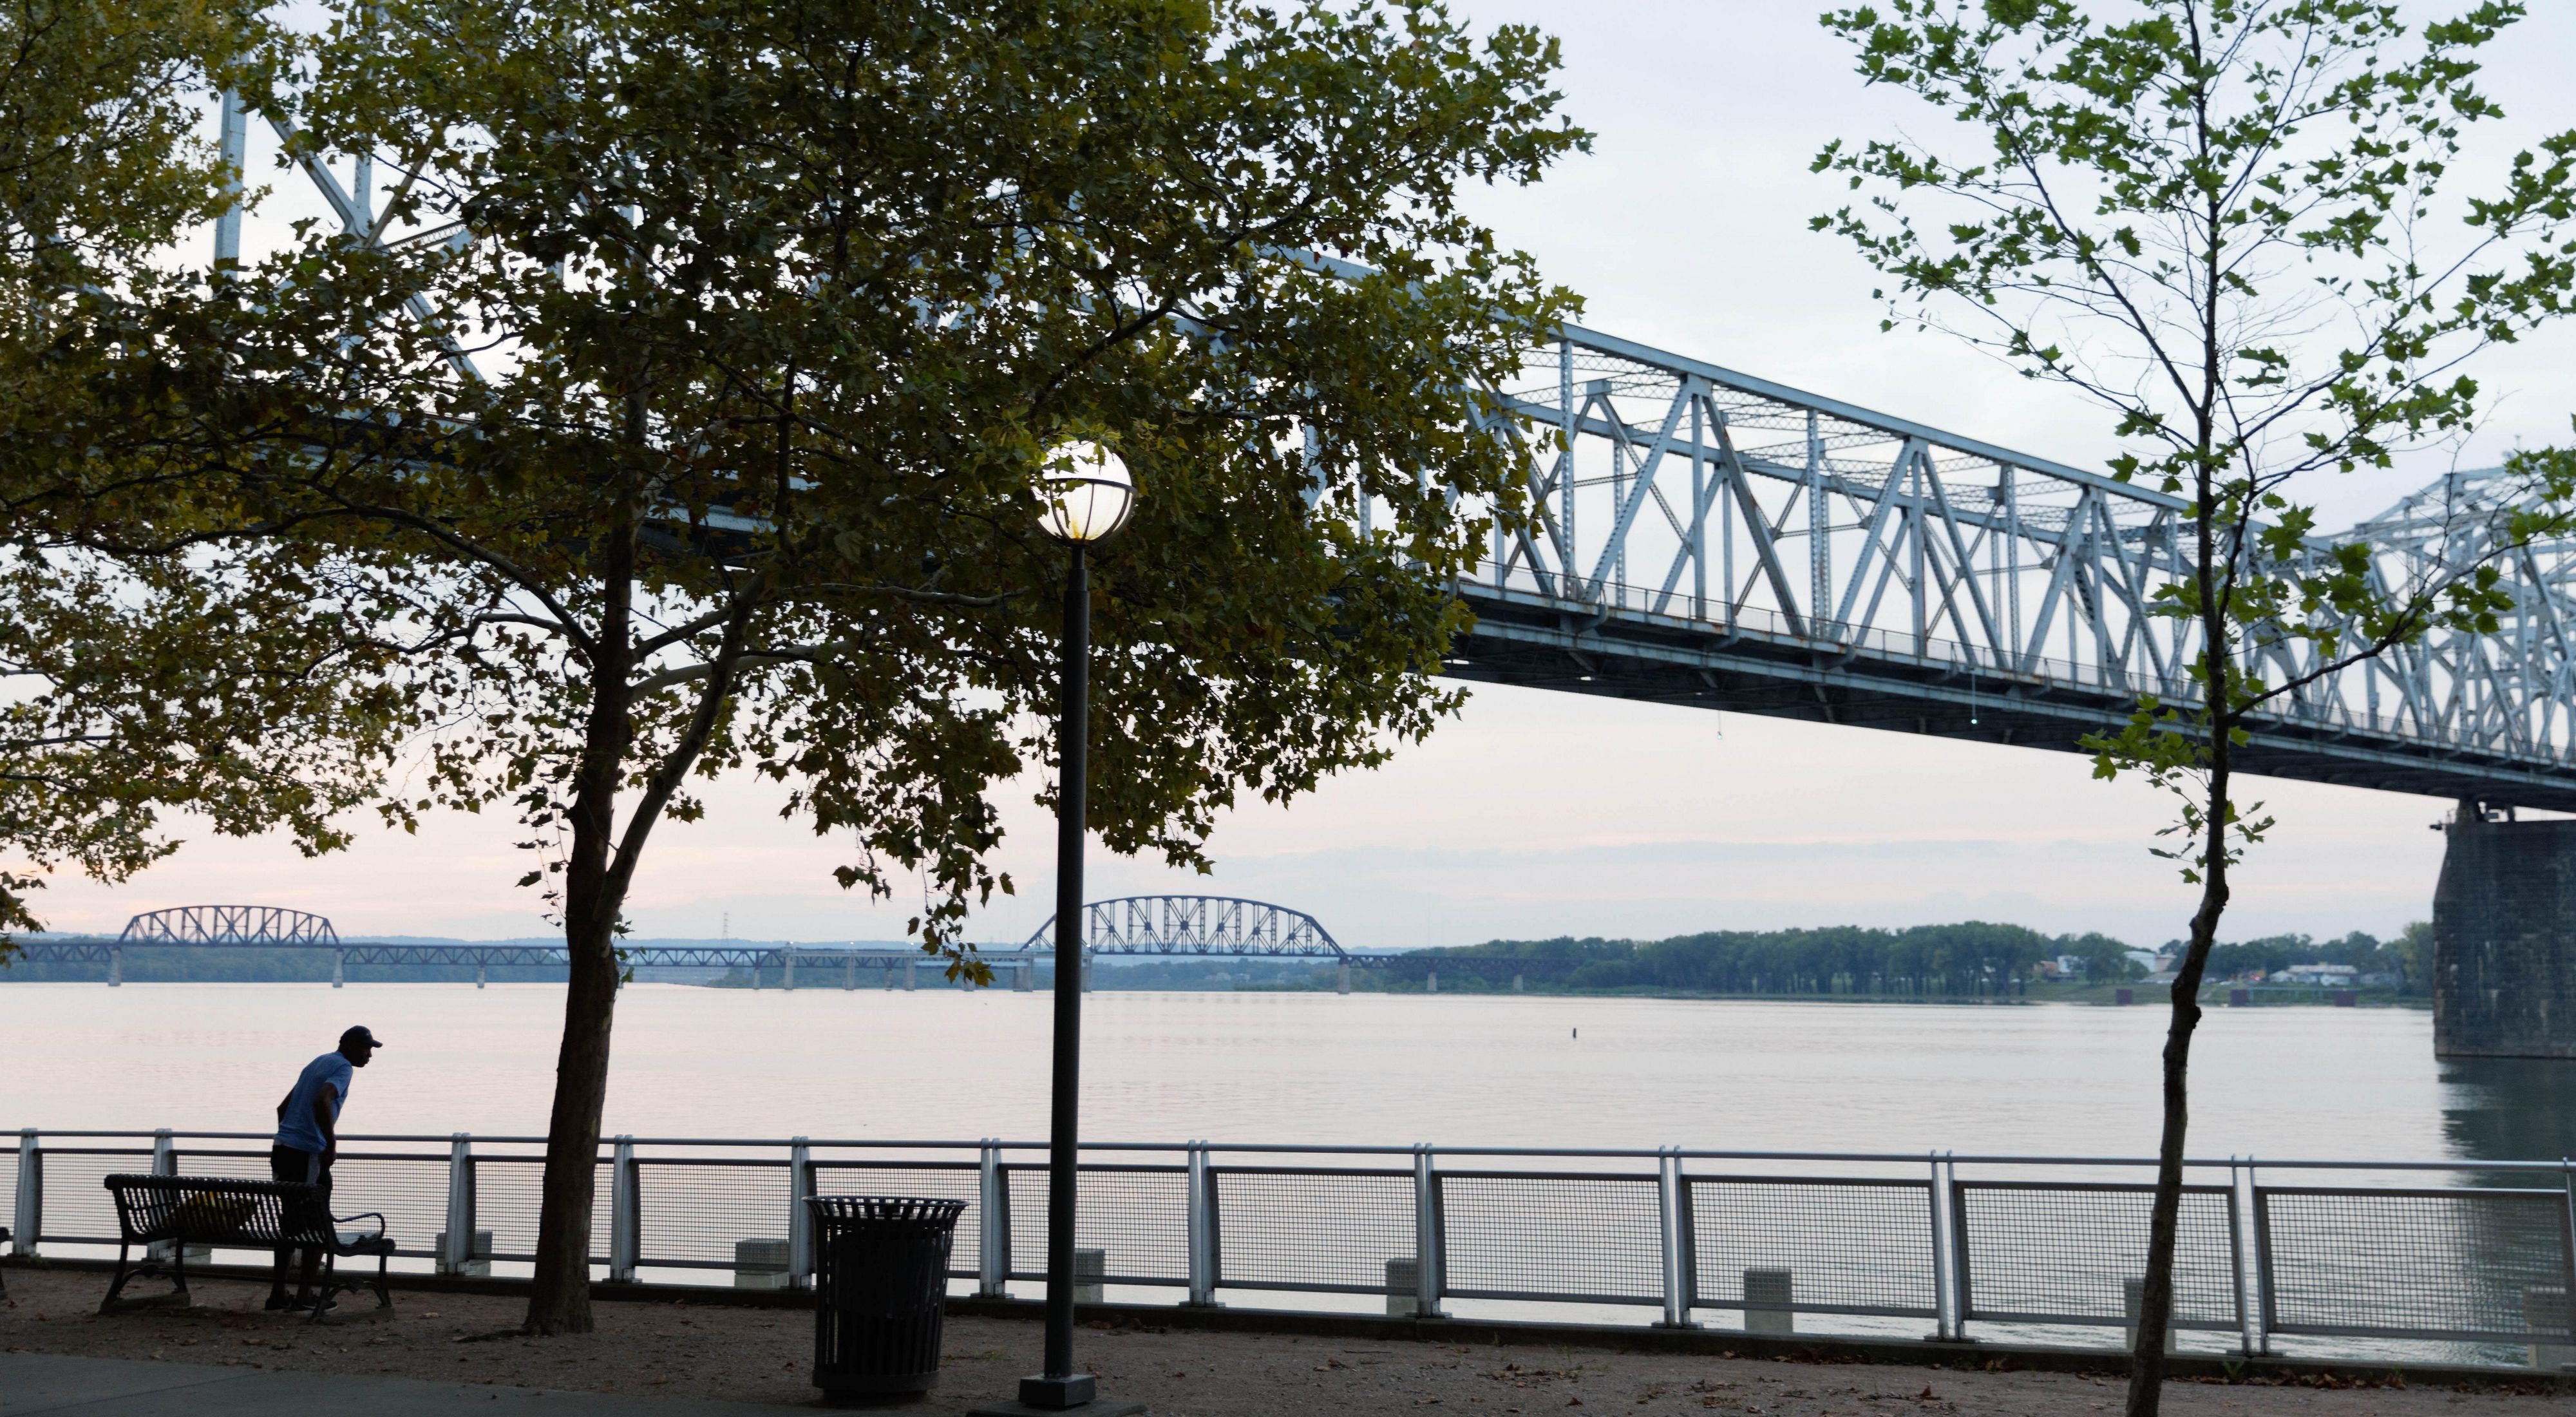 Photo of a steel bridge crossing the Ohio River, with a riverside park in the foreground.